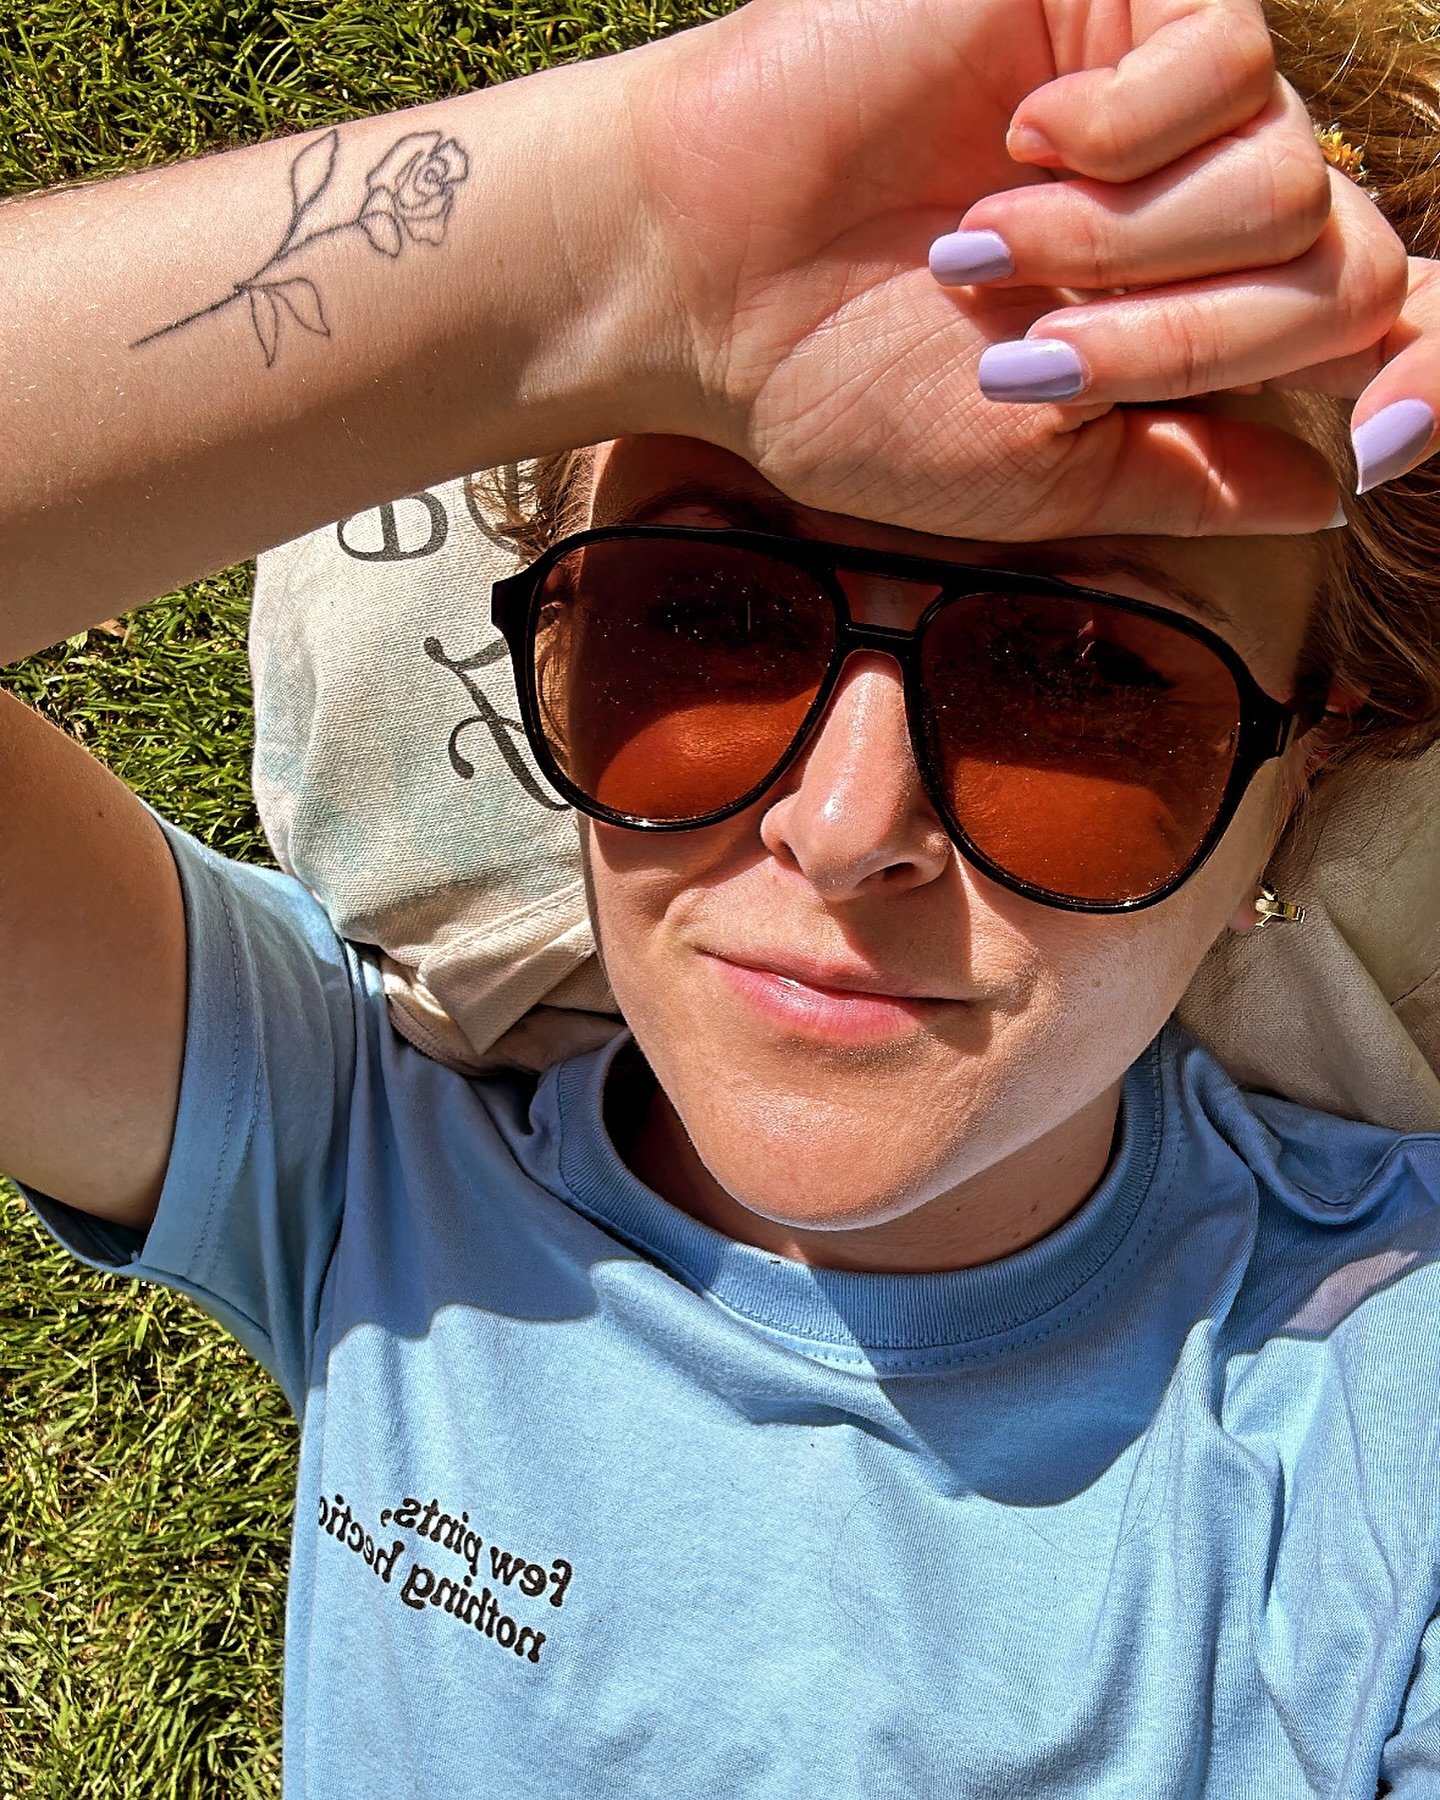 LAST CHANCE, FAM.

Tasting notes drops TOMORROW. Subscribe now so you don&rsquo;t miss it.

Until then, go find a sunny spot to lay. (Dirty sunglasses/messed up nails and all.) Or make your own inside since it&rsquo;s a wee bit chilly outside today🥲